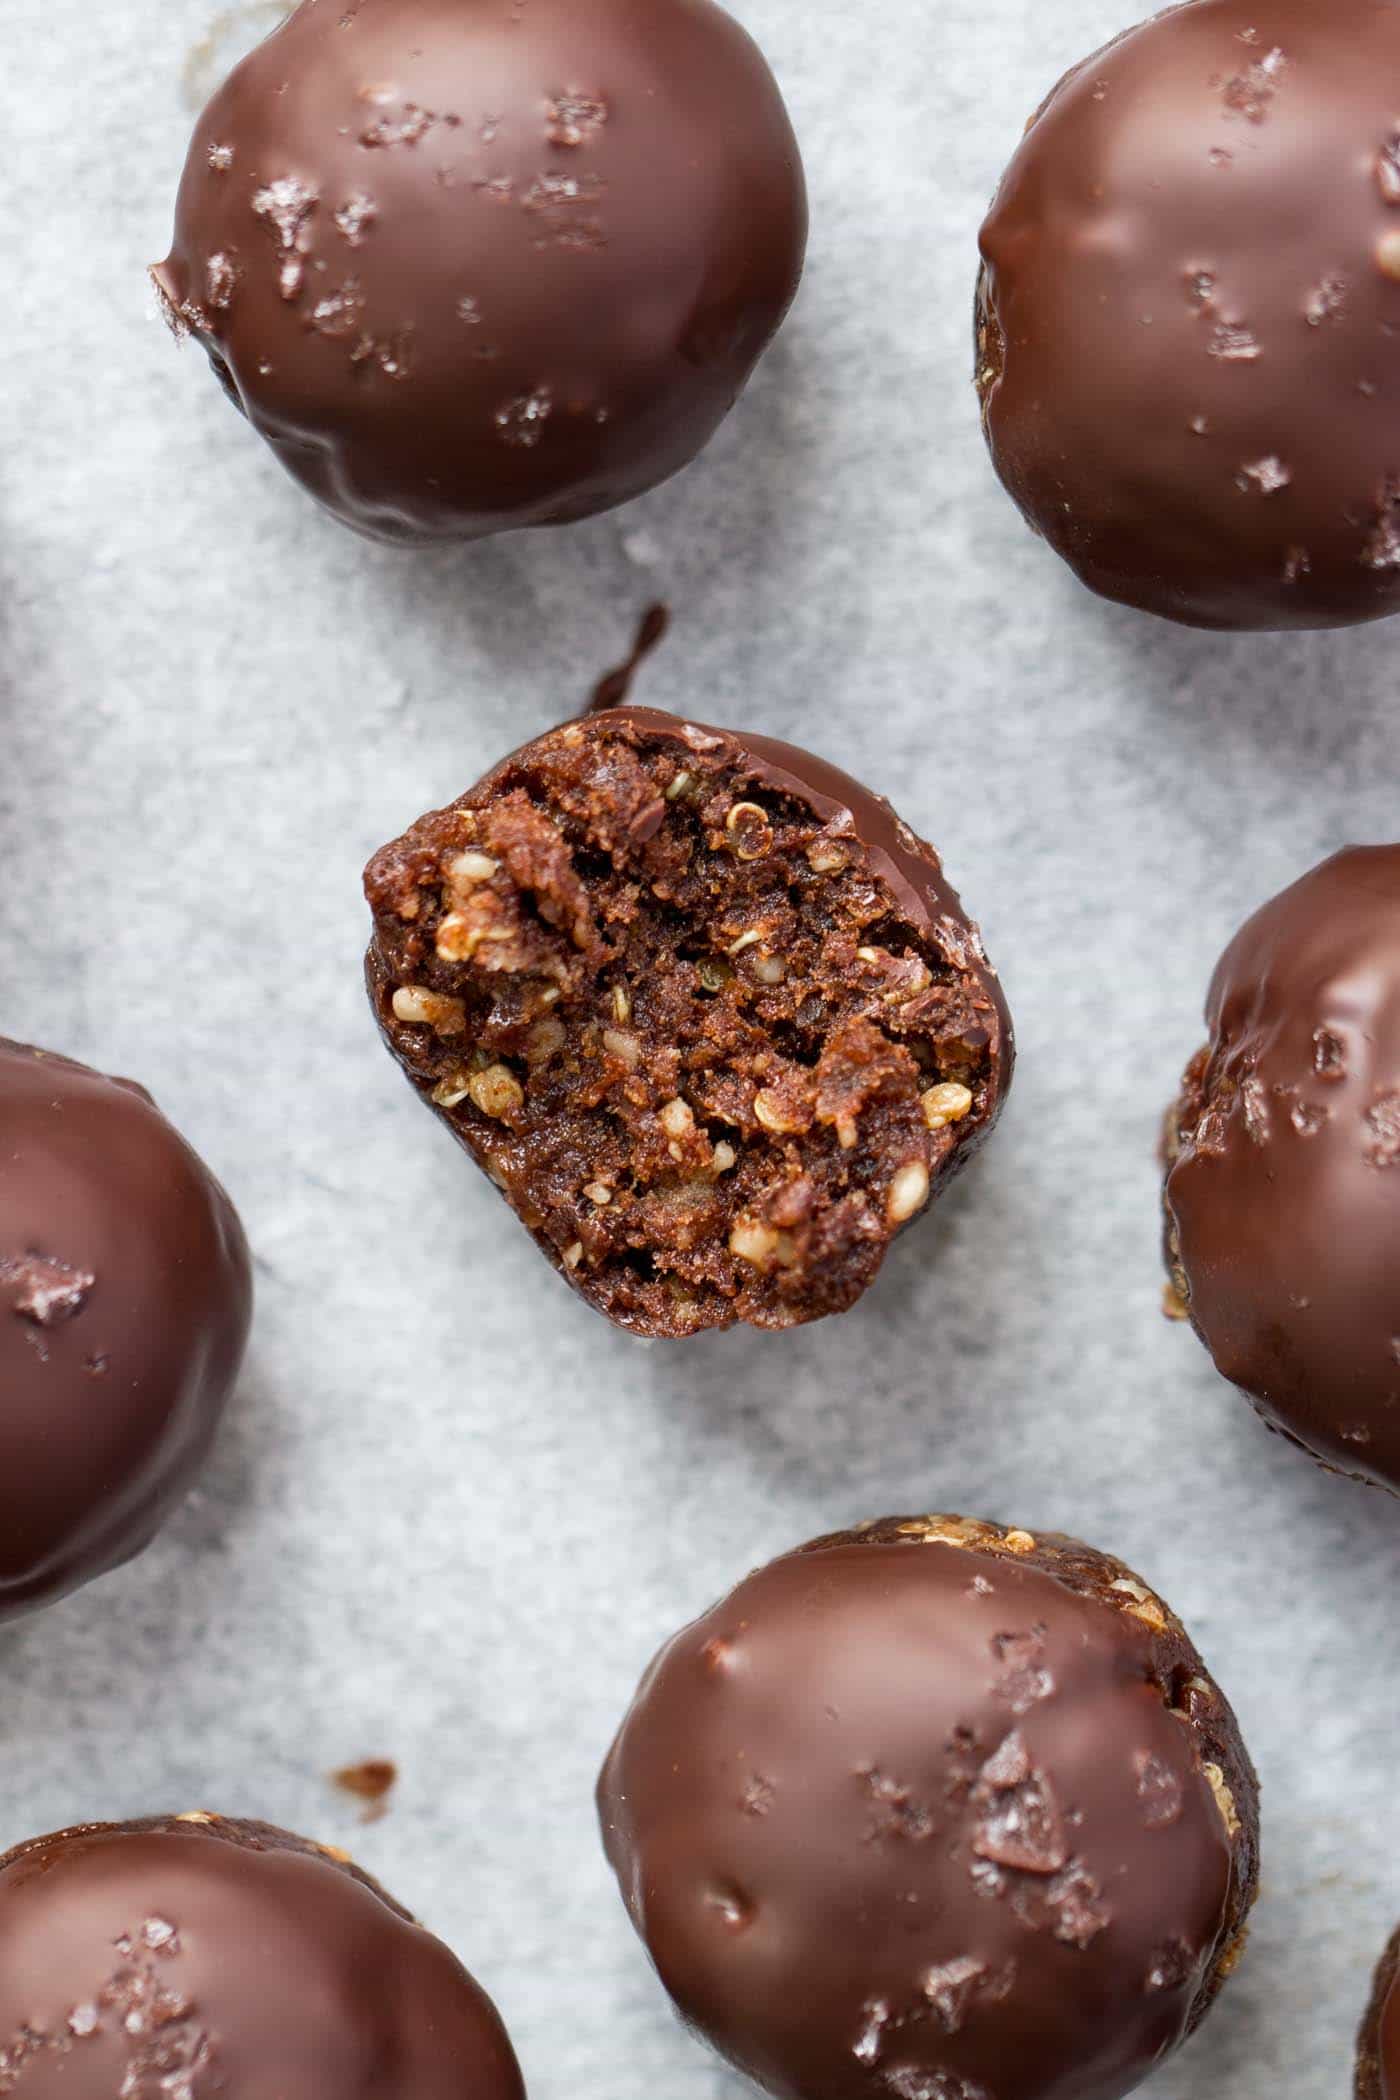 The BEST quinoa energy balls ever -- double dark chocolate + sea salt! They taste like candy, but are actually good for you! [vegan + gf]